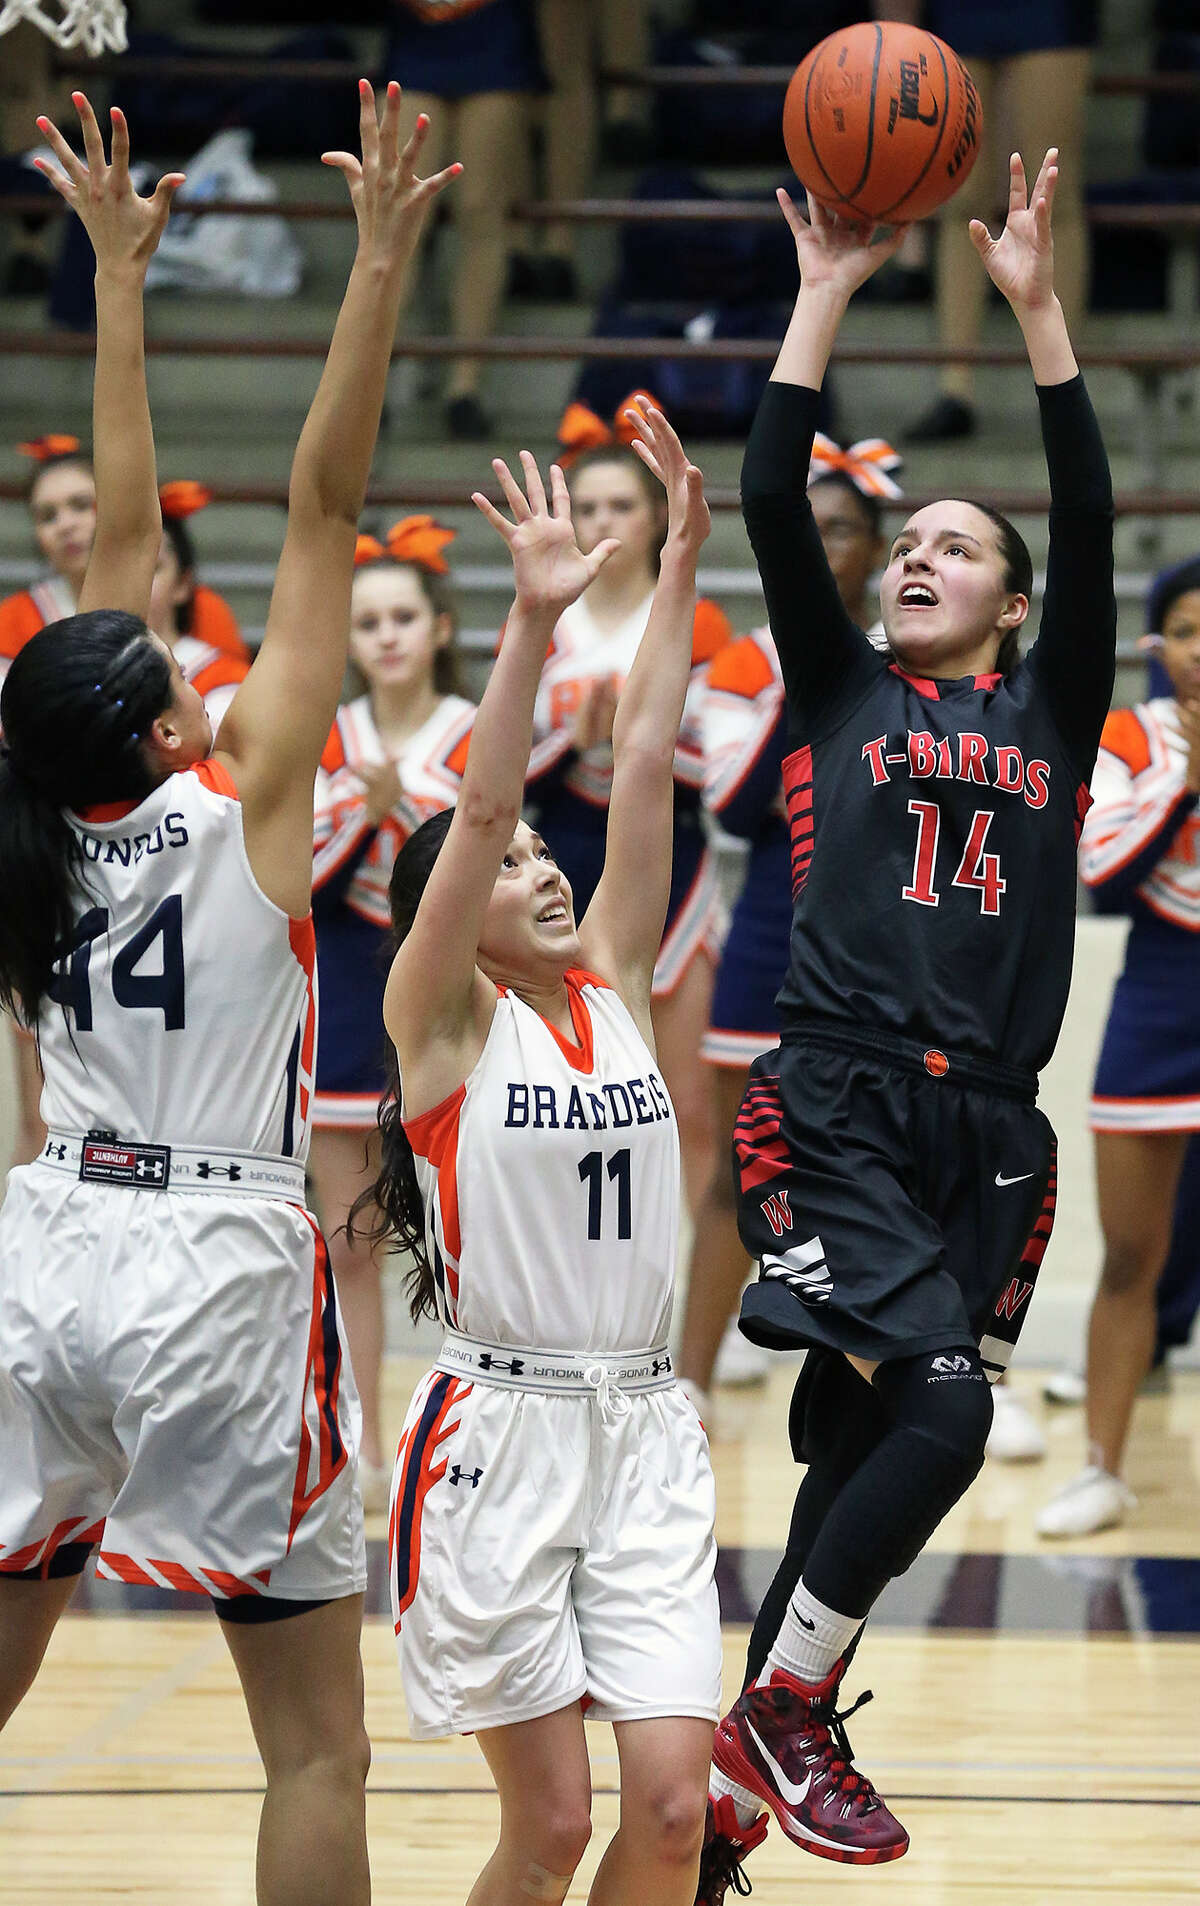 T-Bird guard Amber Ramirez pops up for a baseline jumper against Morgan Williams (44) and Kyana Alvarez as Brandeis plays Wagner in second round 6A girls basketball playoff action at the Alamo Convocation Center on February 20, 2015